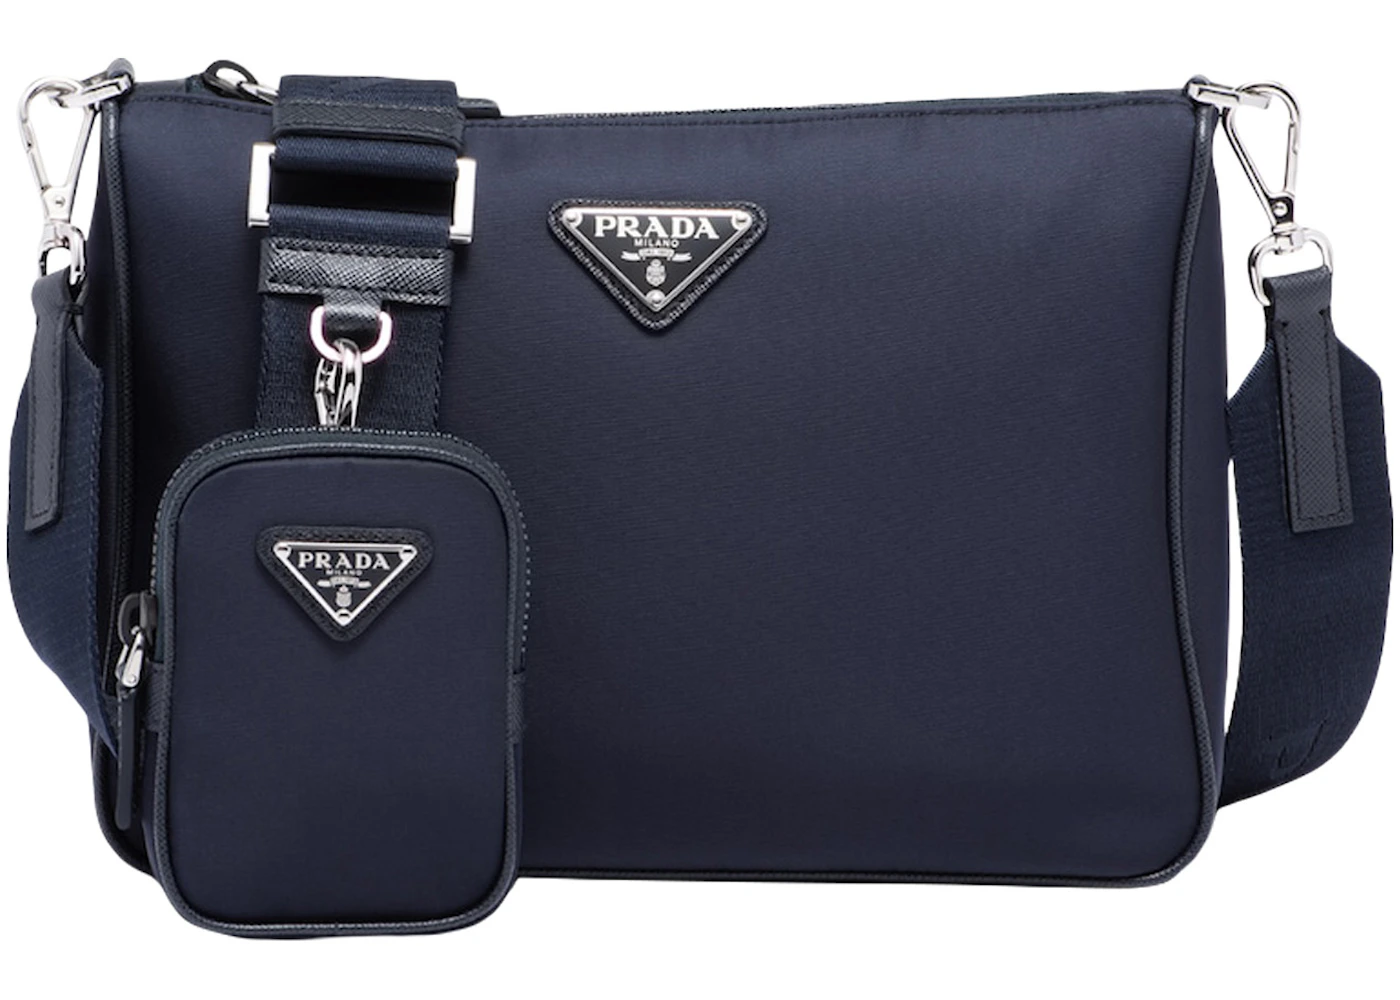 Prada Re-Nylon and Saffiano Leather (Removable Pouch) Shoulder Bag Navy ...